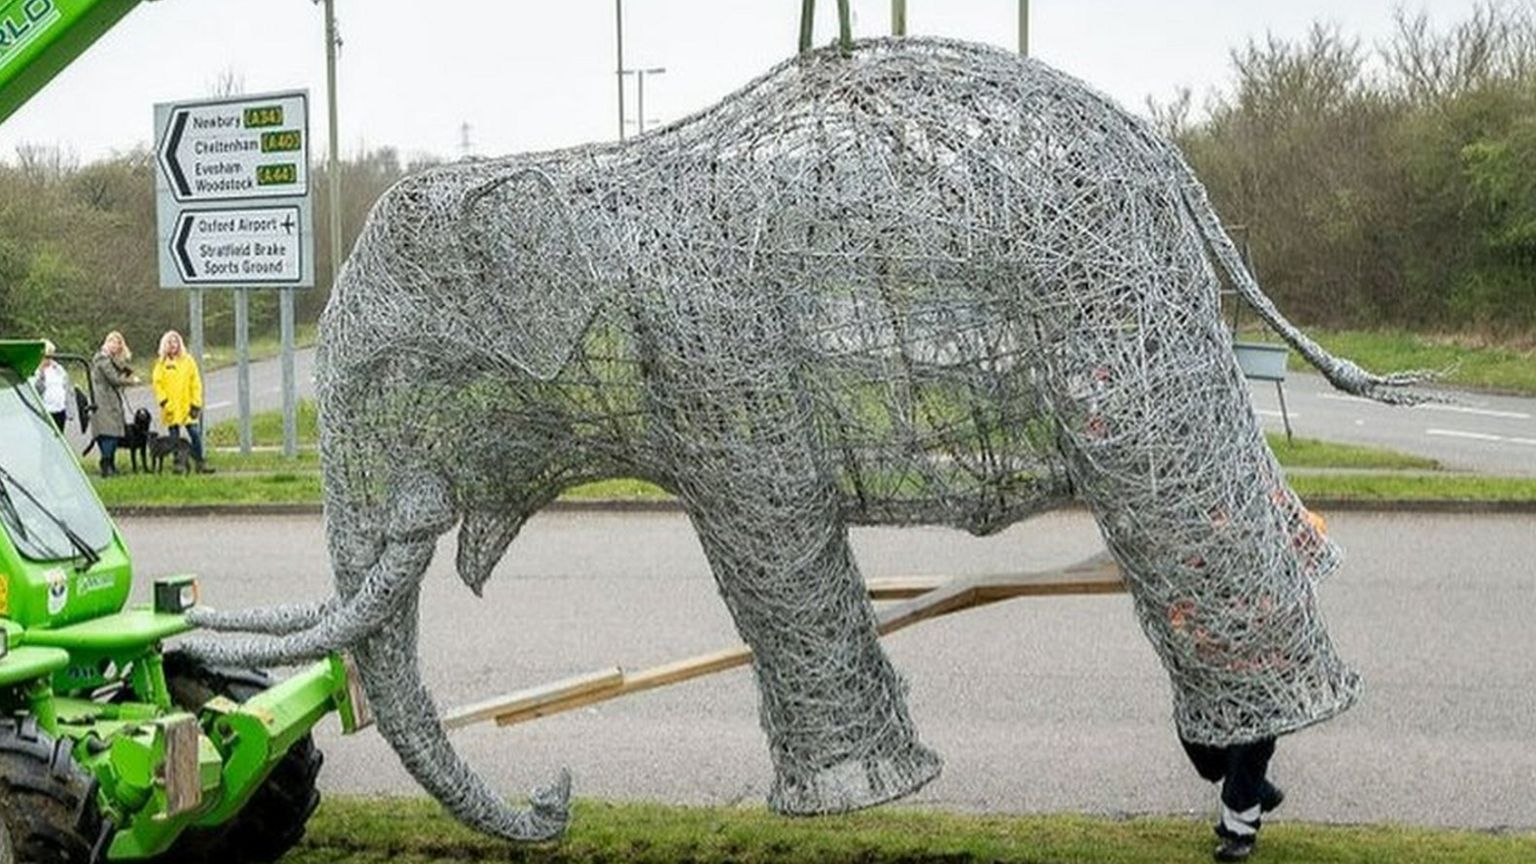 Rosie the Elephant returned to roundabout